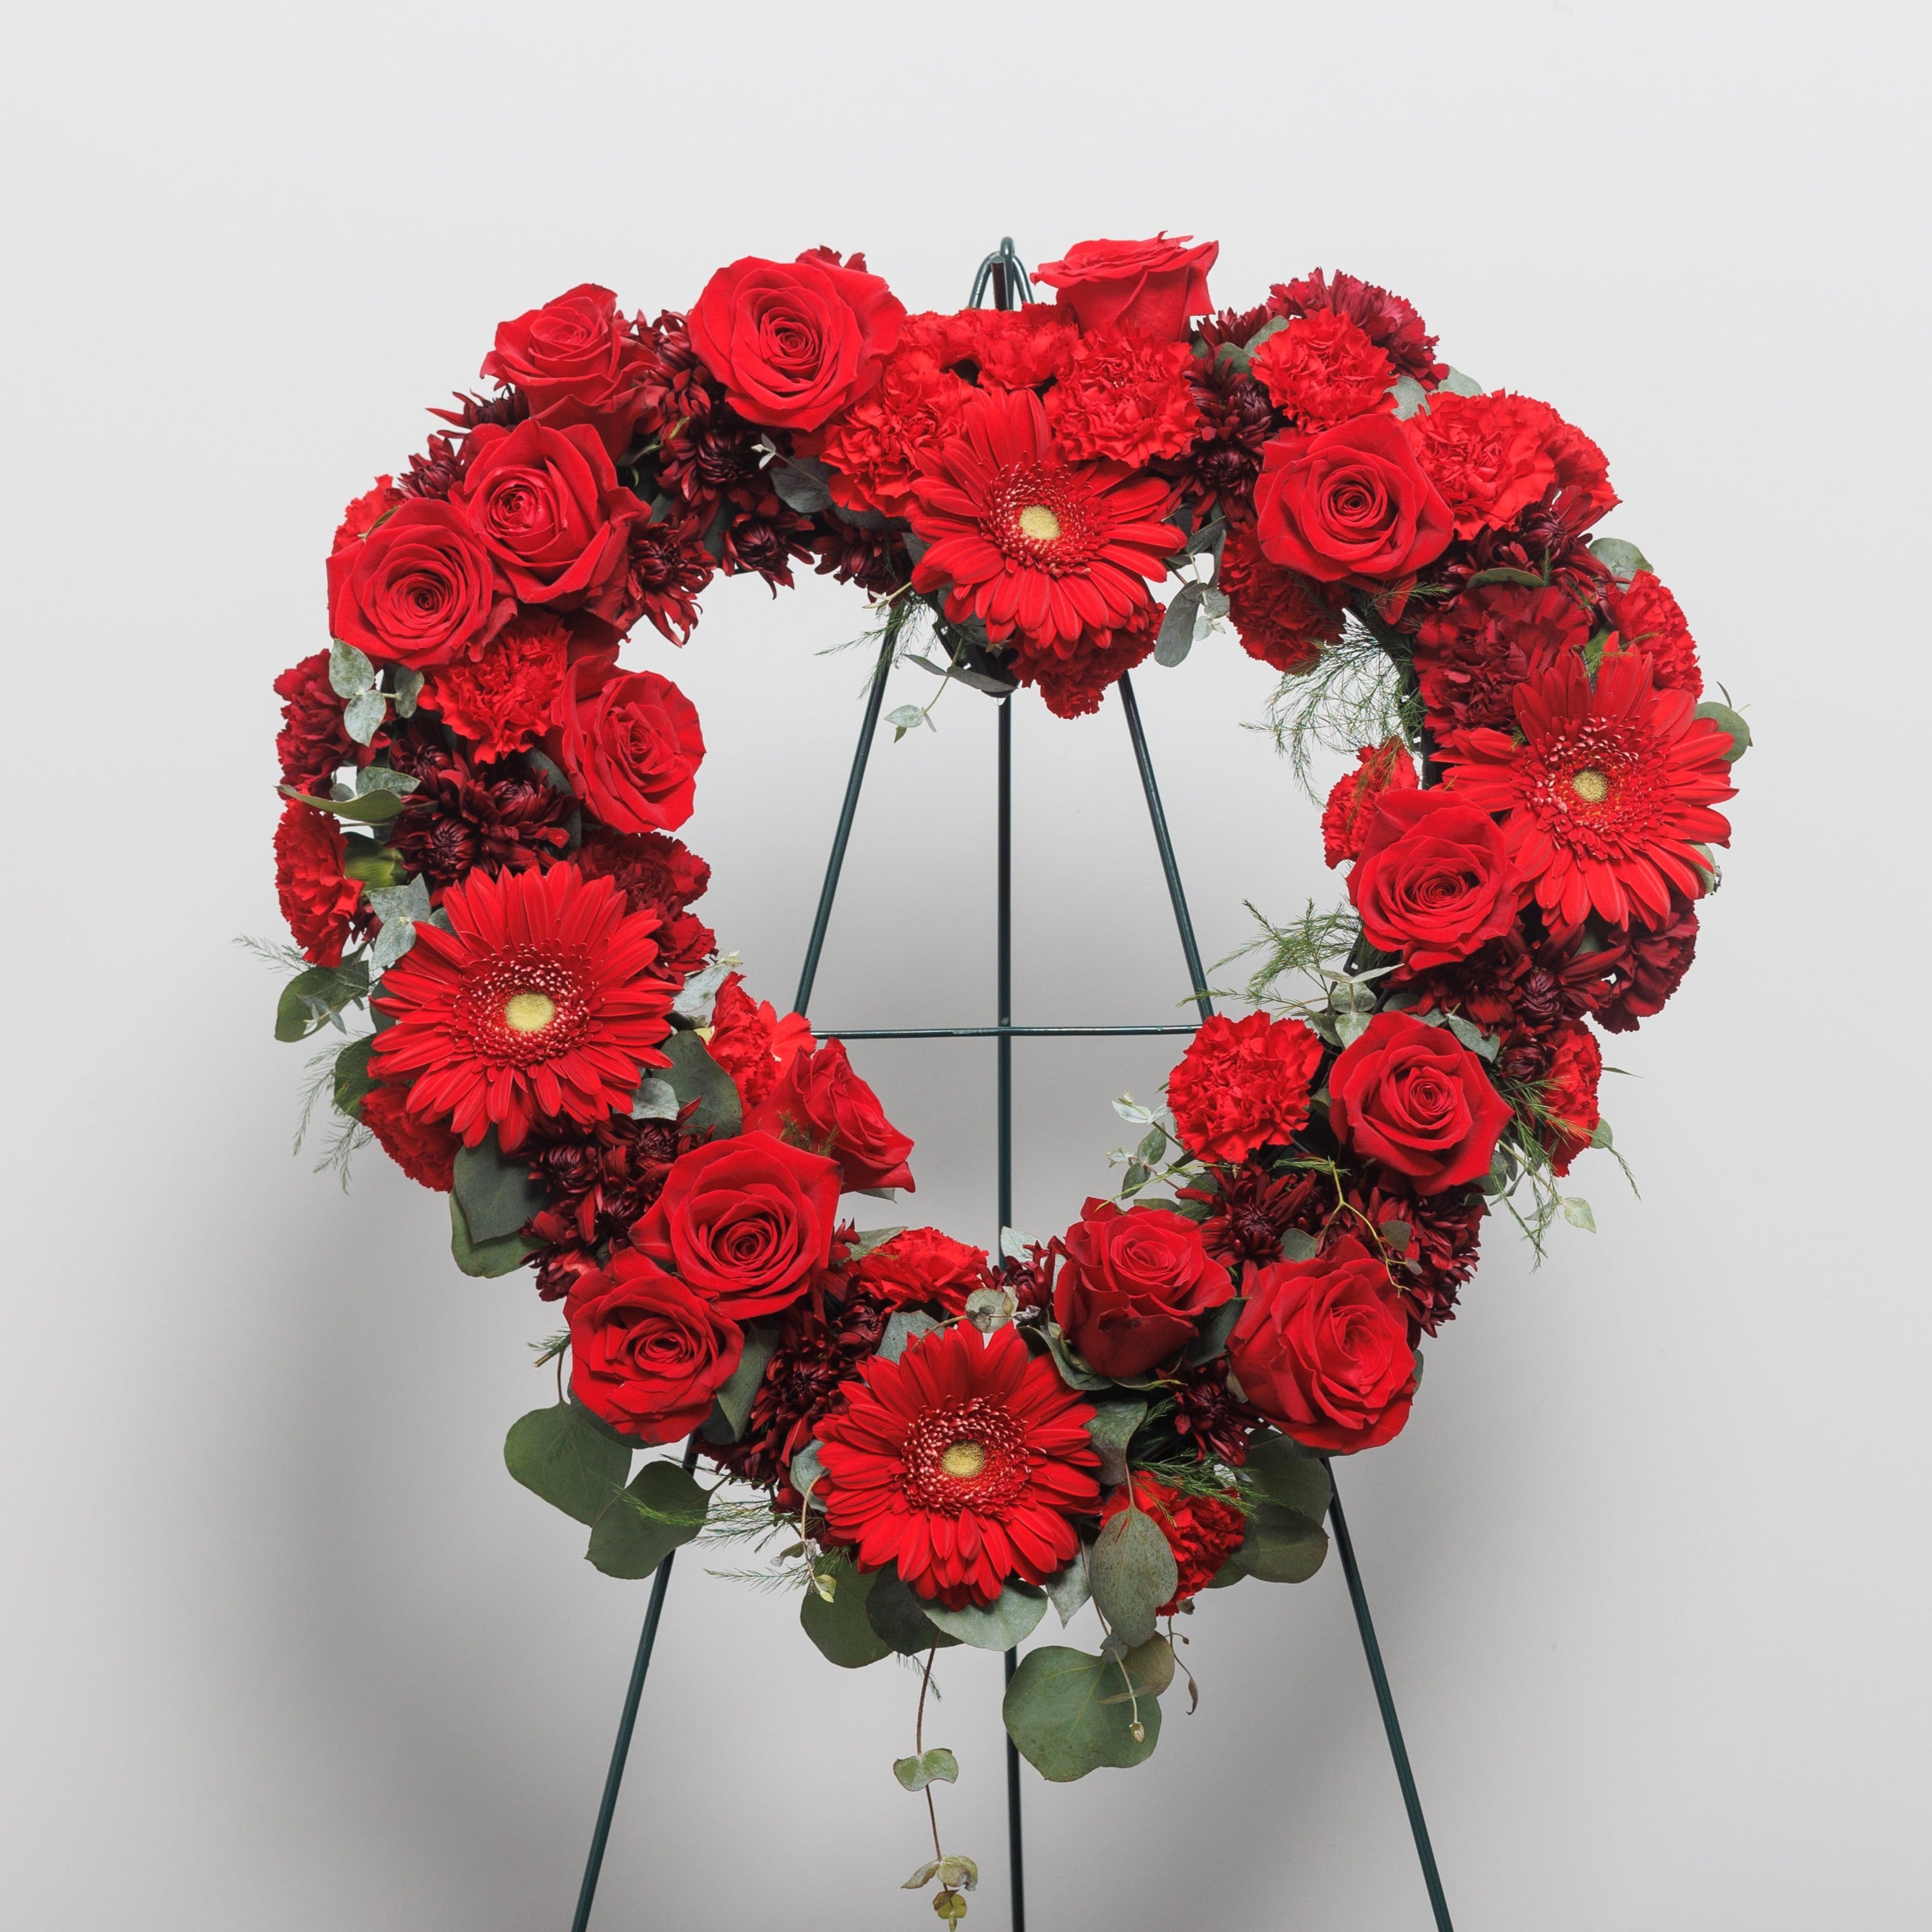 A heart wreath spray with red roses, red gerber daisies and red carnations.